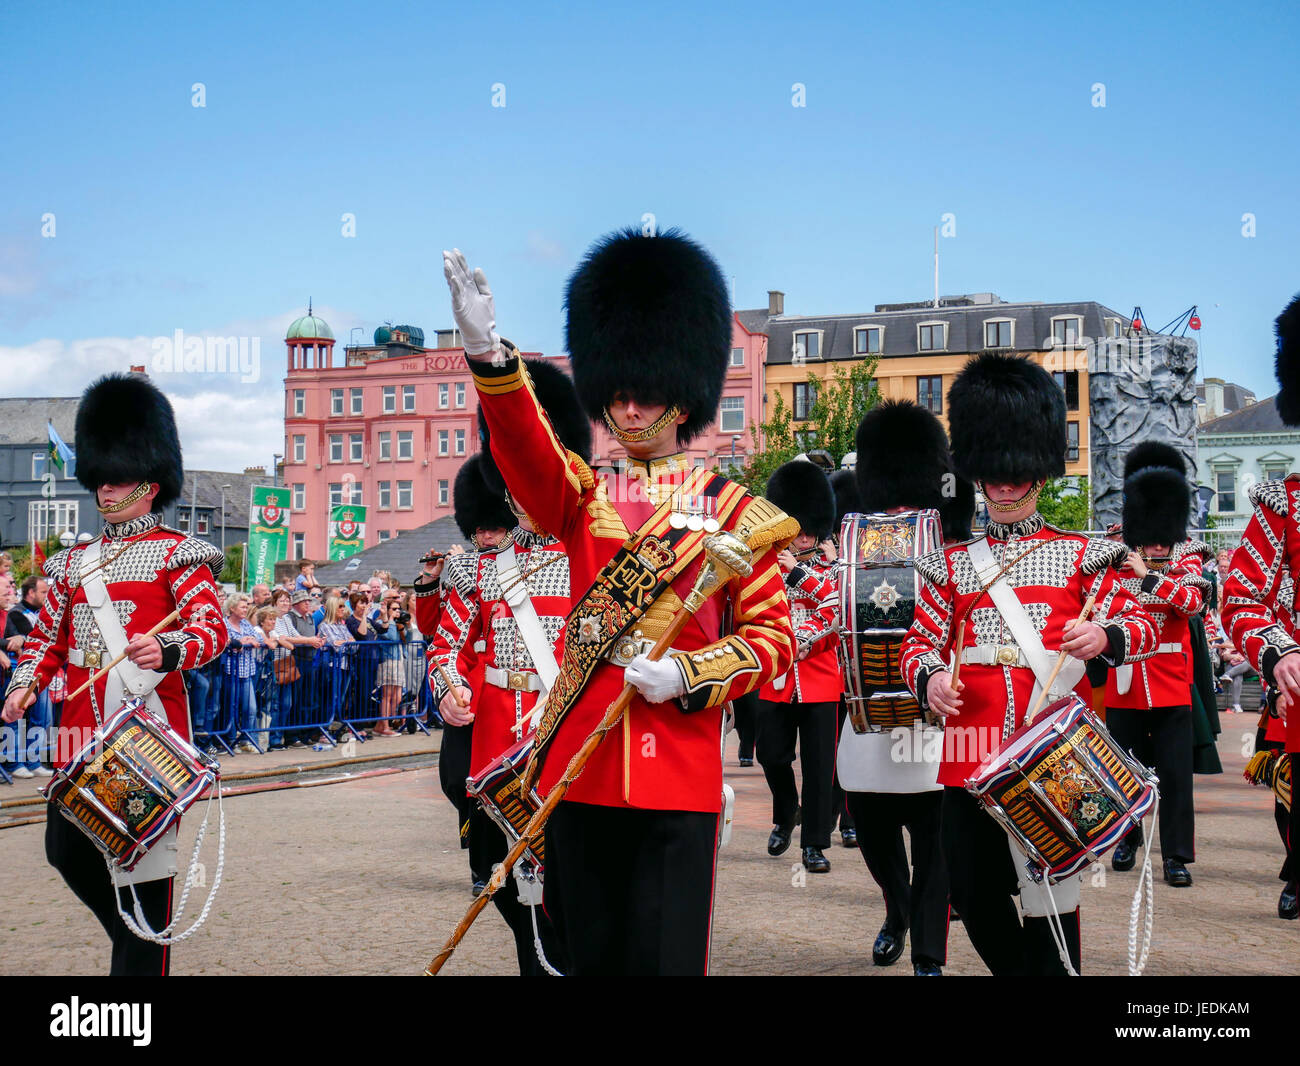 Bangor, Northern Ireland, UK. 24 June 2017. The Northern Ireland Armed Forces Day hosted by Bangor Sea Festival drew crowds to the seaside town. The weather co-operated with sunshine throughout and a temperature approaching 20C. Irish Guards Band. Credit J Orr/Alamy Live News Stock Photo